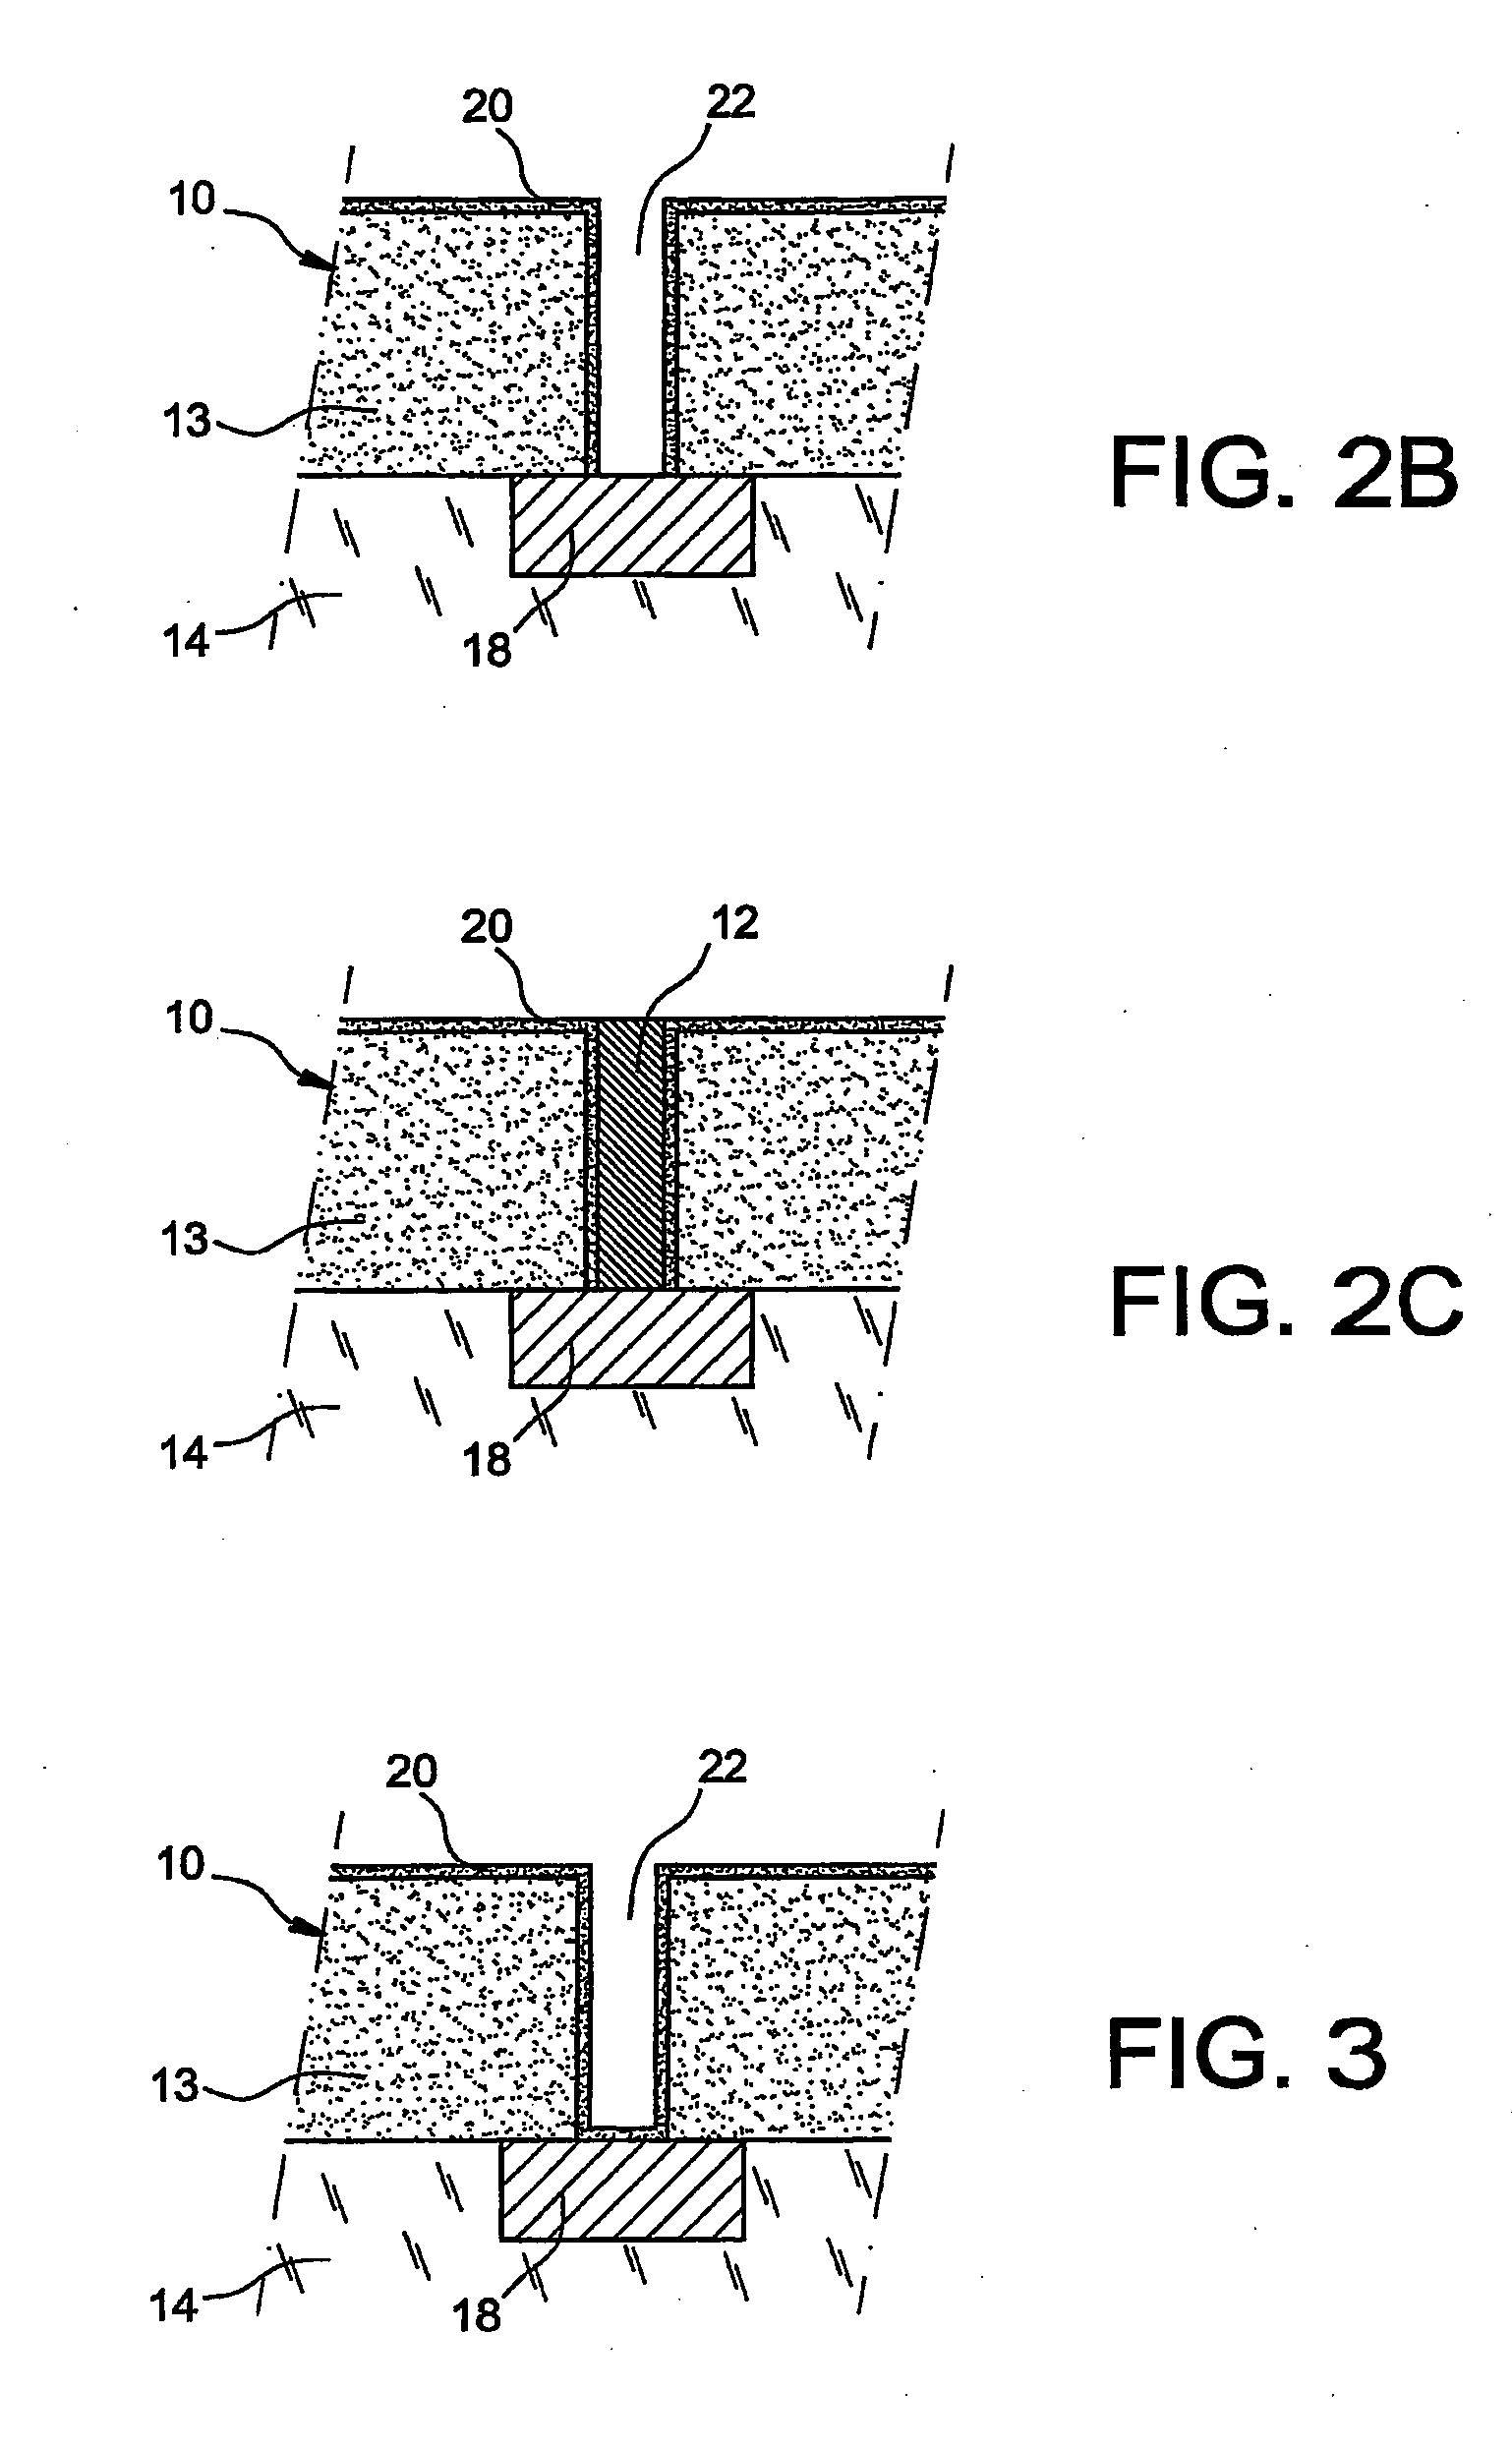 Interconnection structure with low dielectric constant